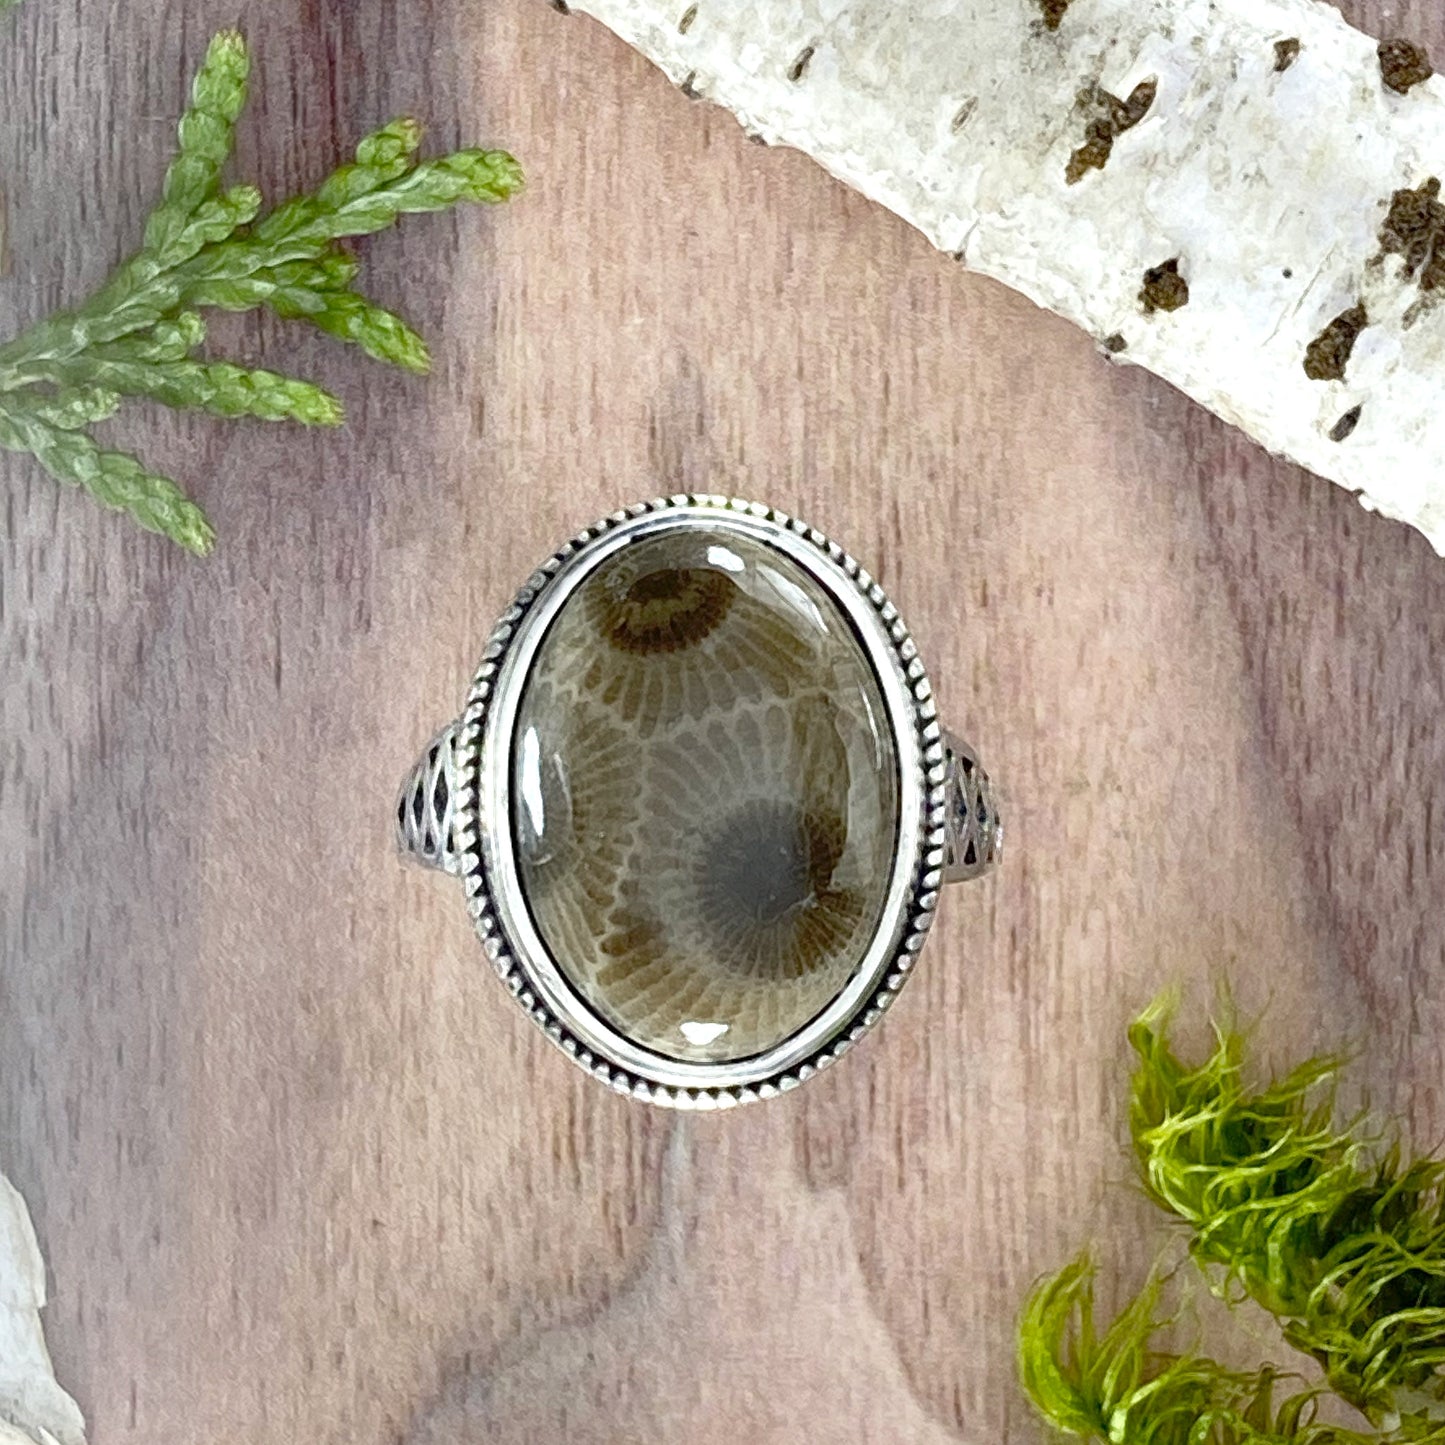 Petoskey Stone Ring Front View - Stone Treasures by the Lake